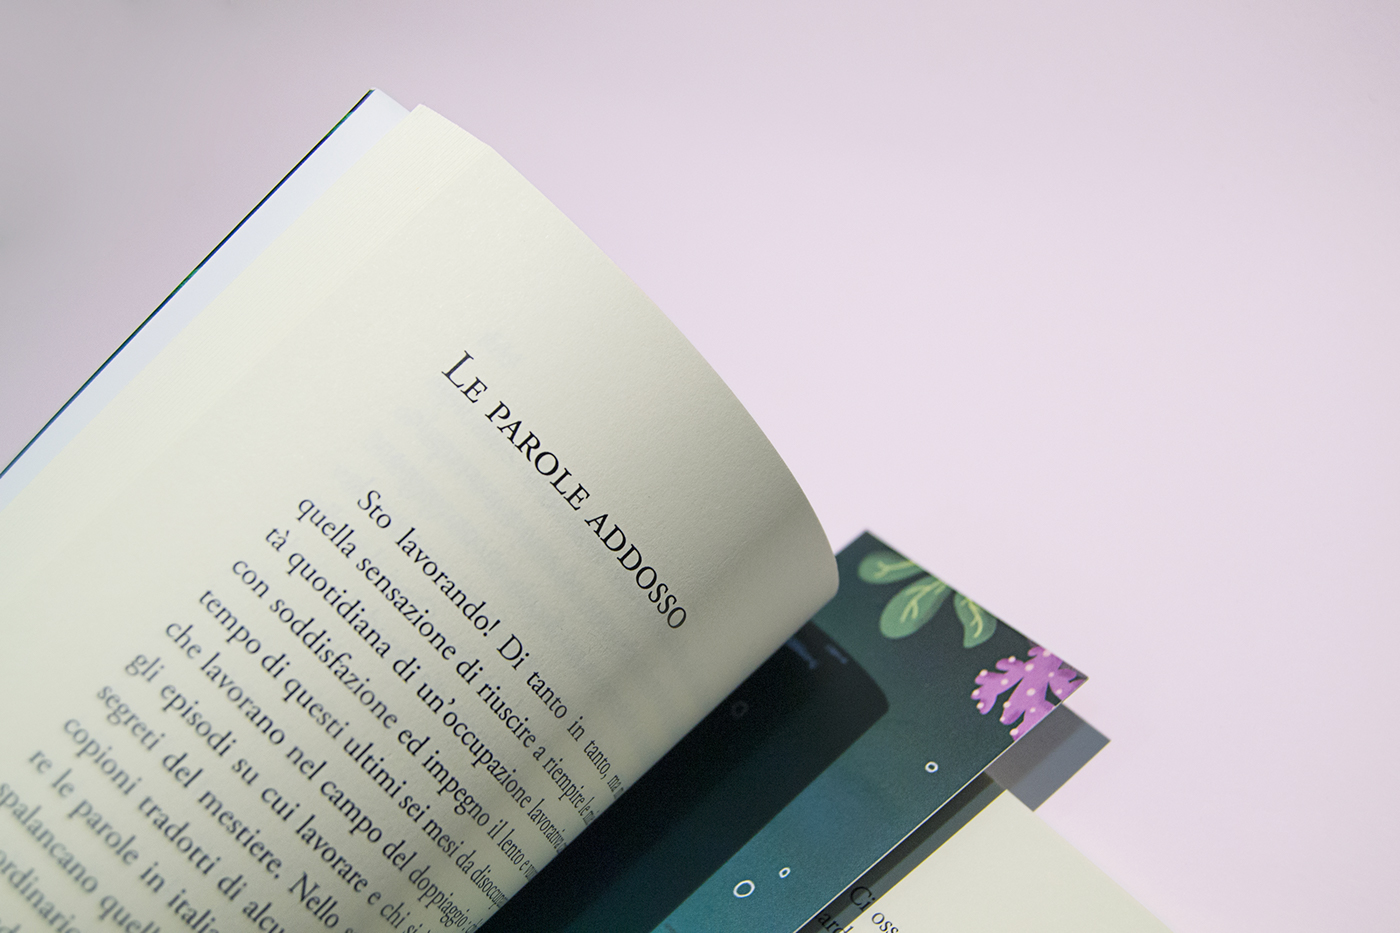 book Photography  Layout typography   ILLUSTRATION  Adobe InDesign graphic graphic design  book design inspire